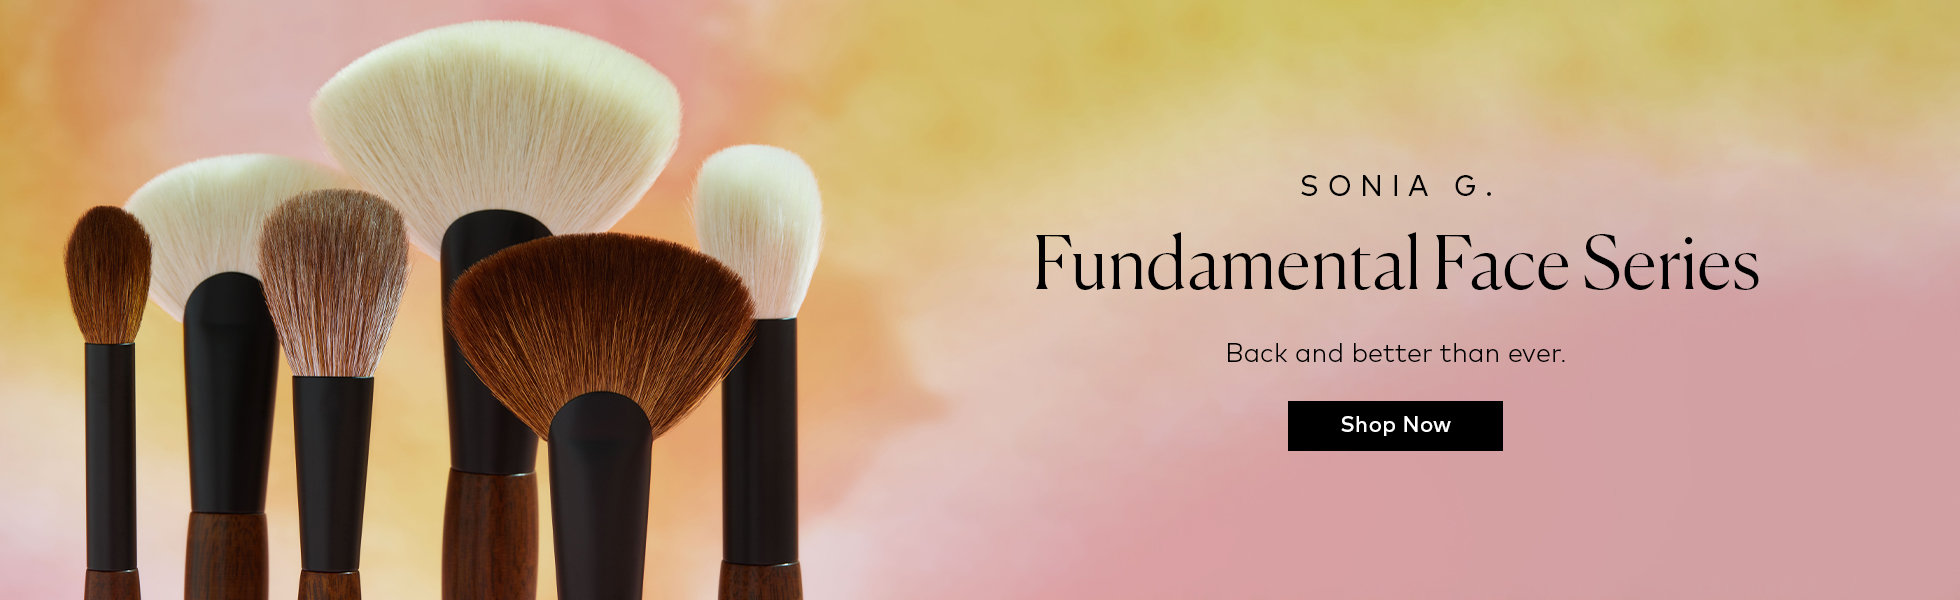 Shop the Sonia G. Fundamental Face Series now at Beautylish.com